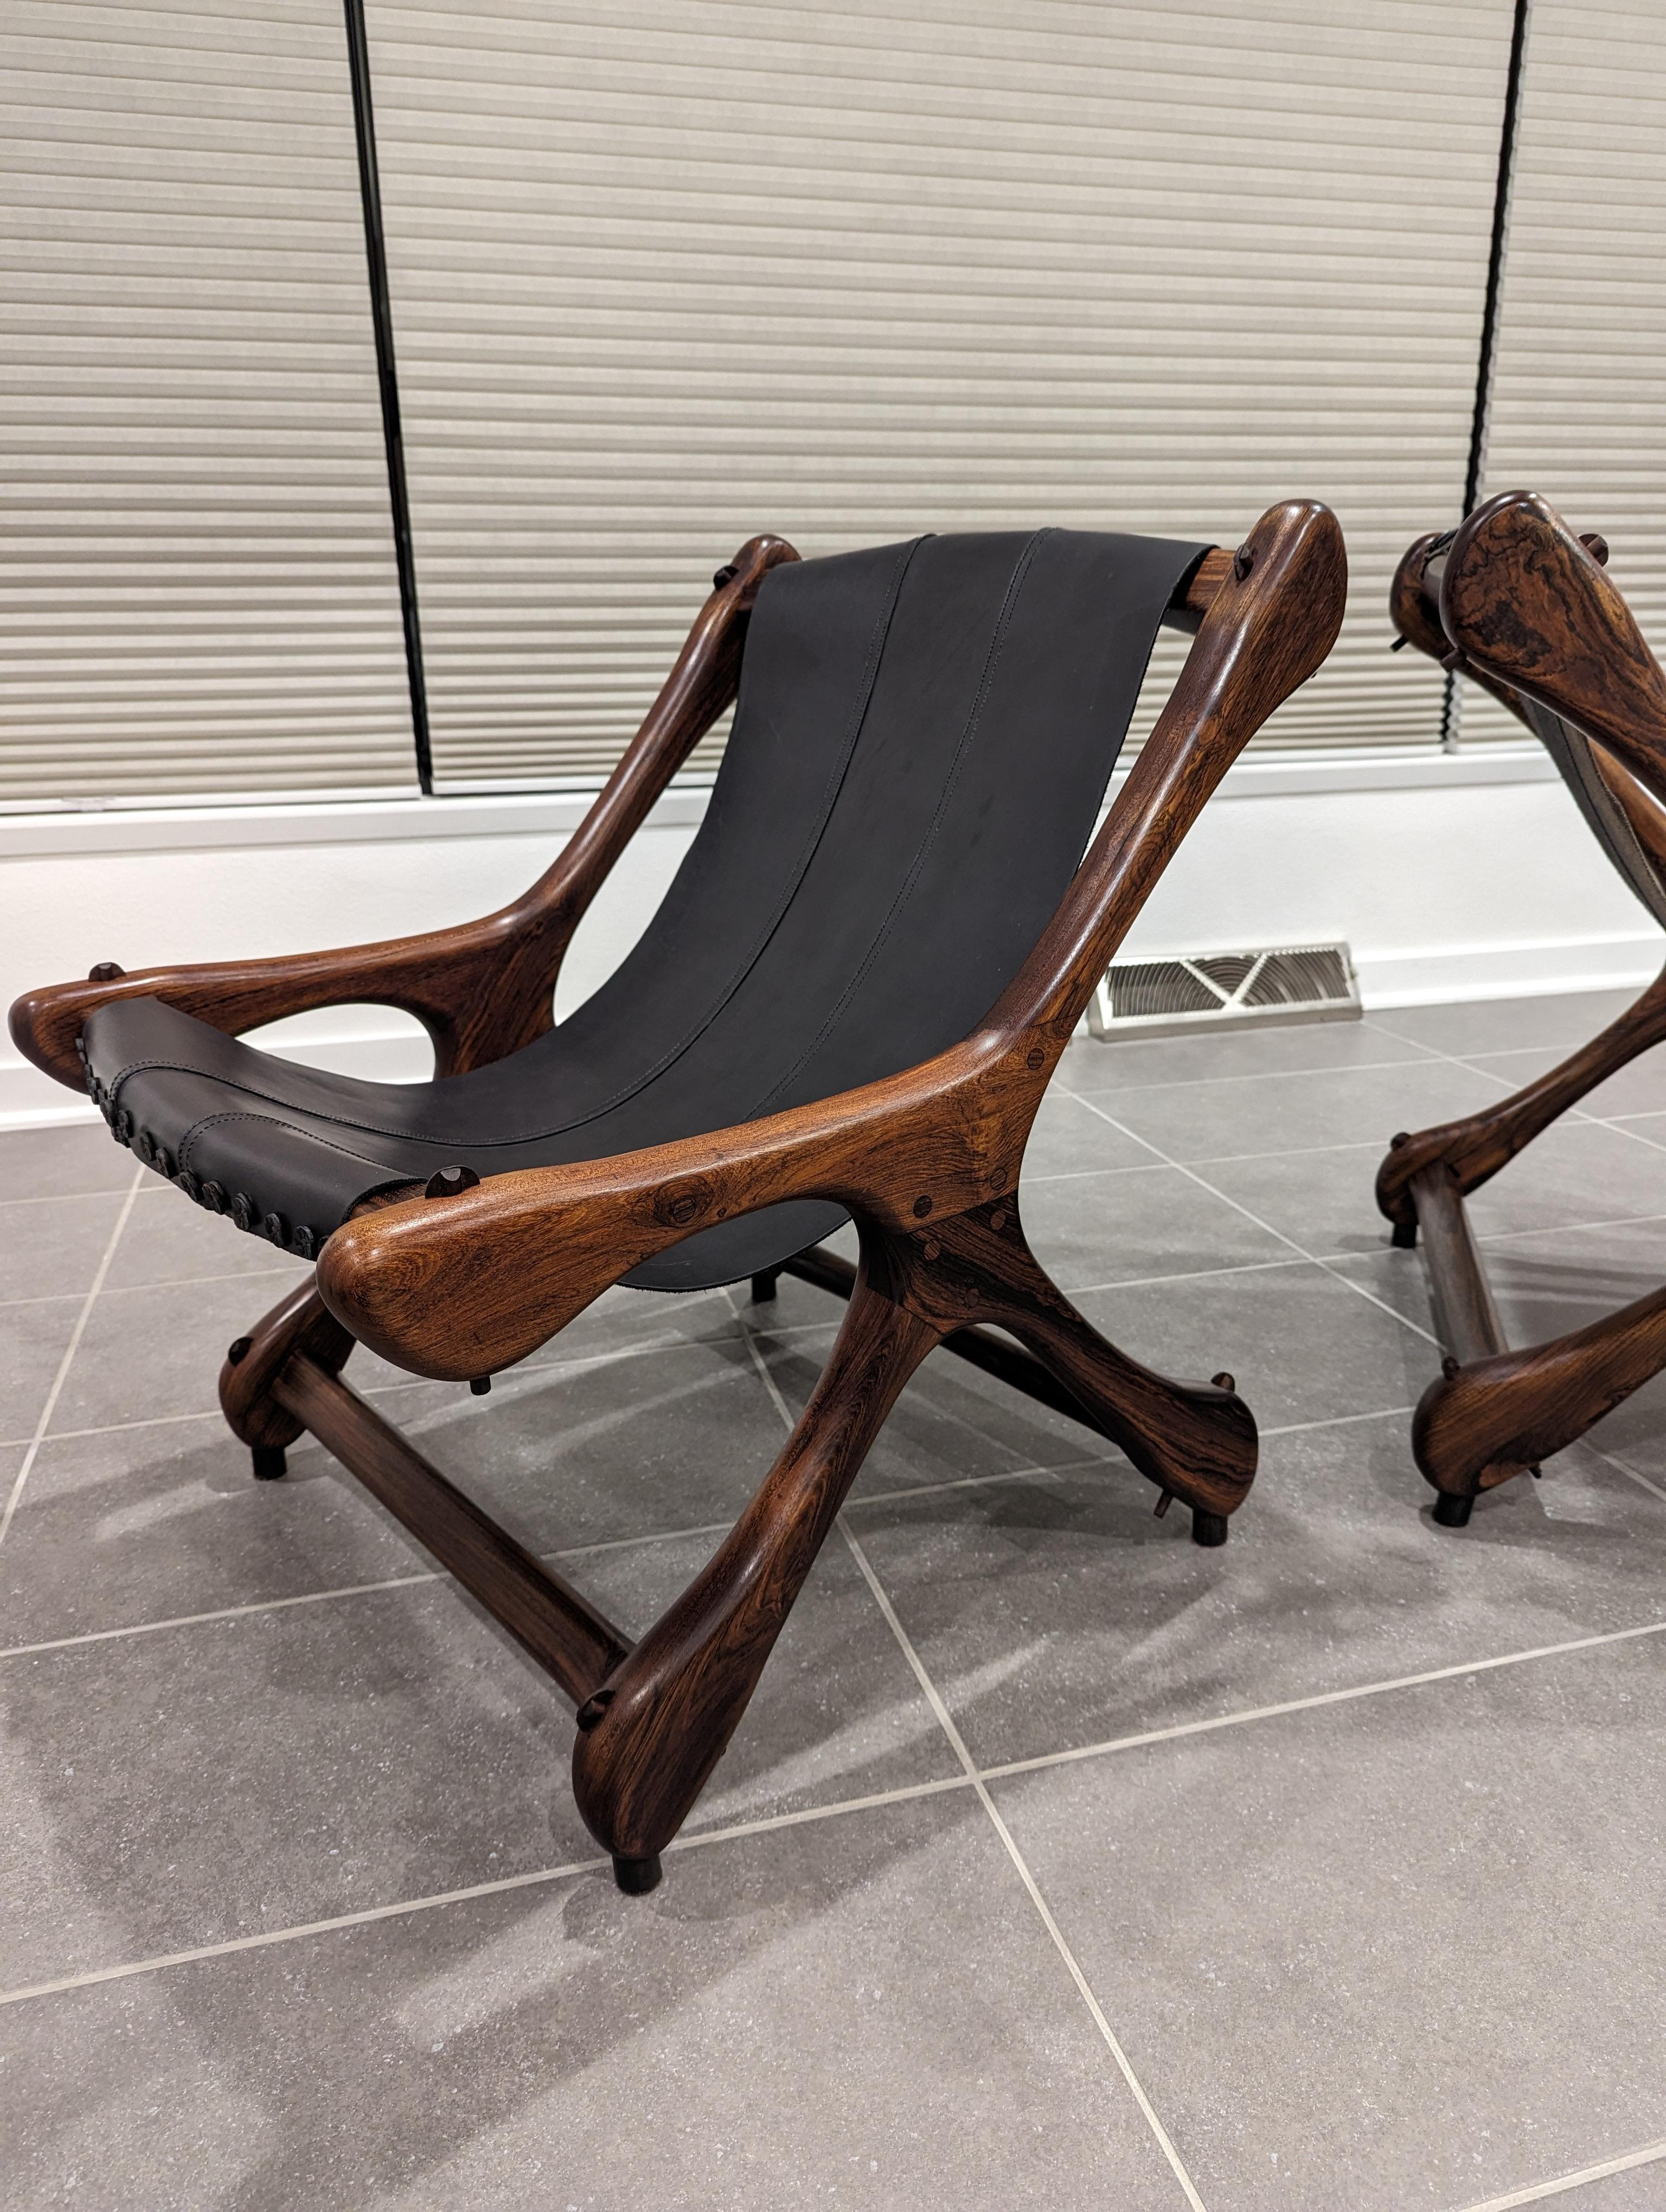 Don Shoemaker Sloucher Rosewood & Leather Sling Chairs for Señal, S.A., 1960s For Sale 7